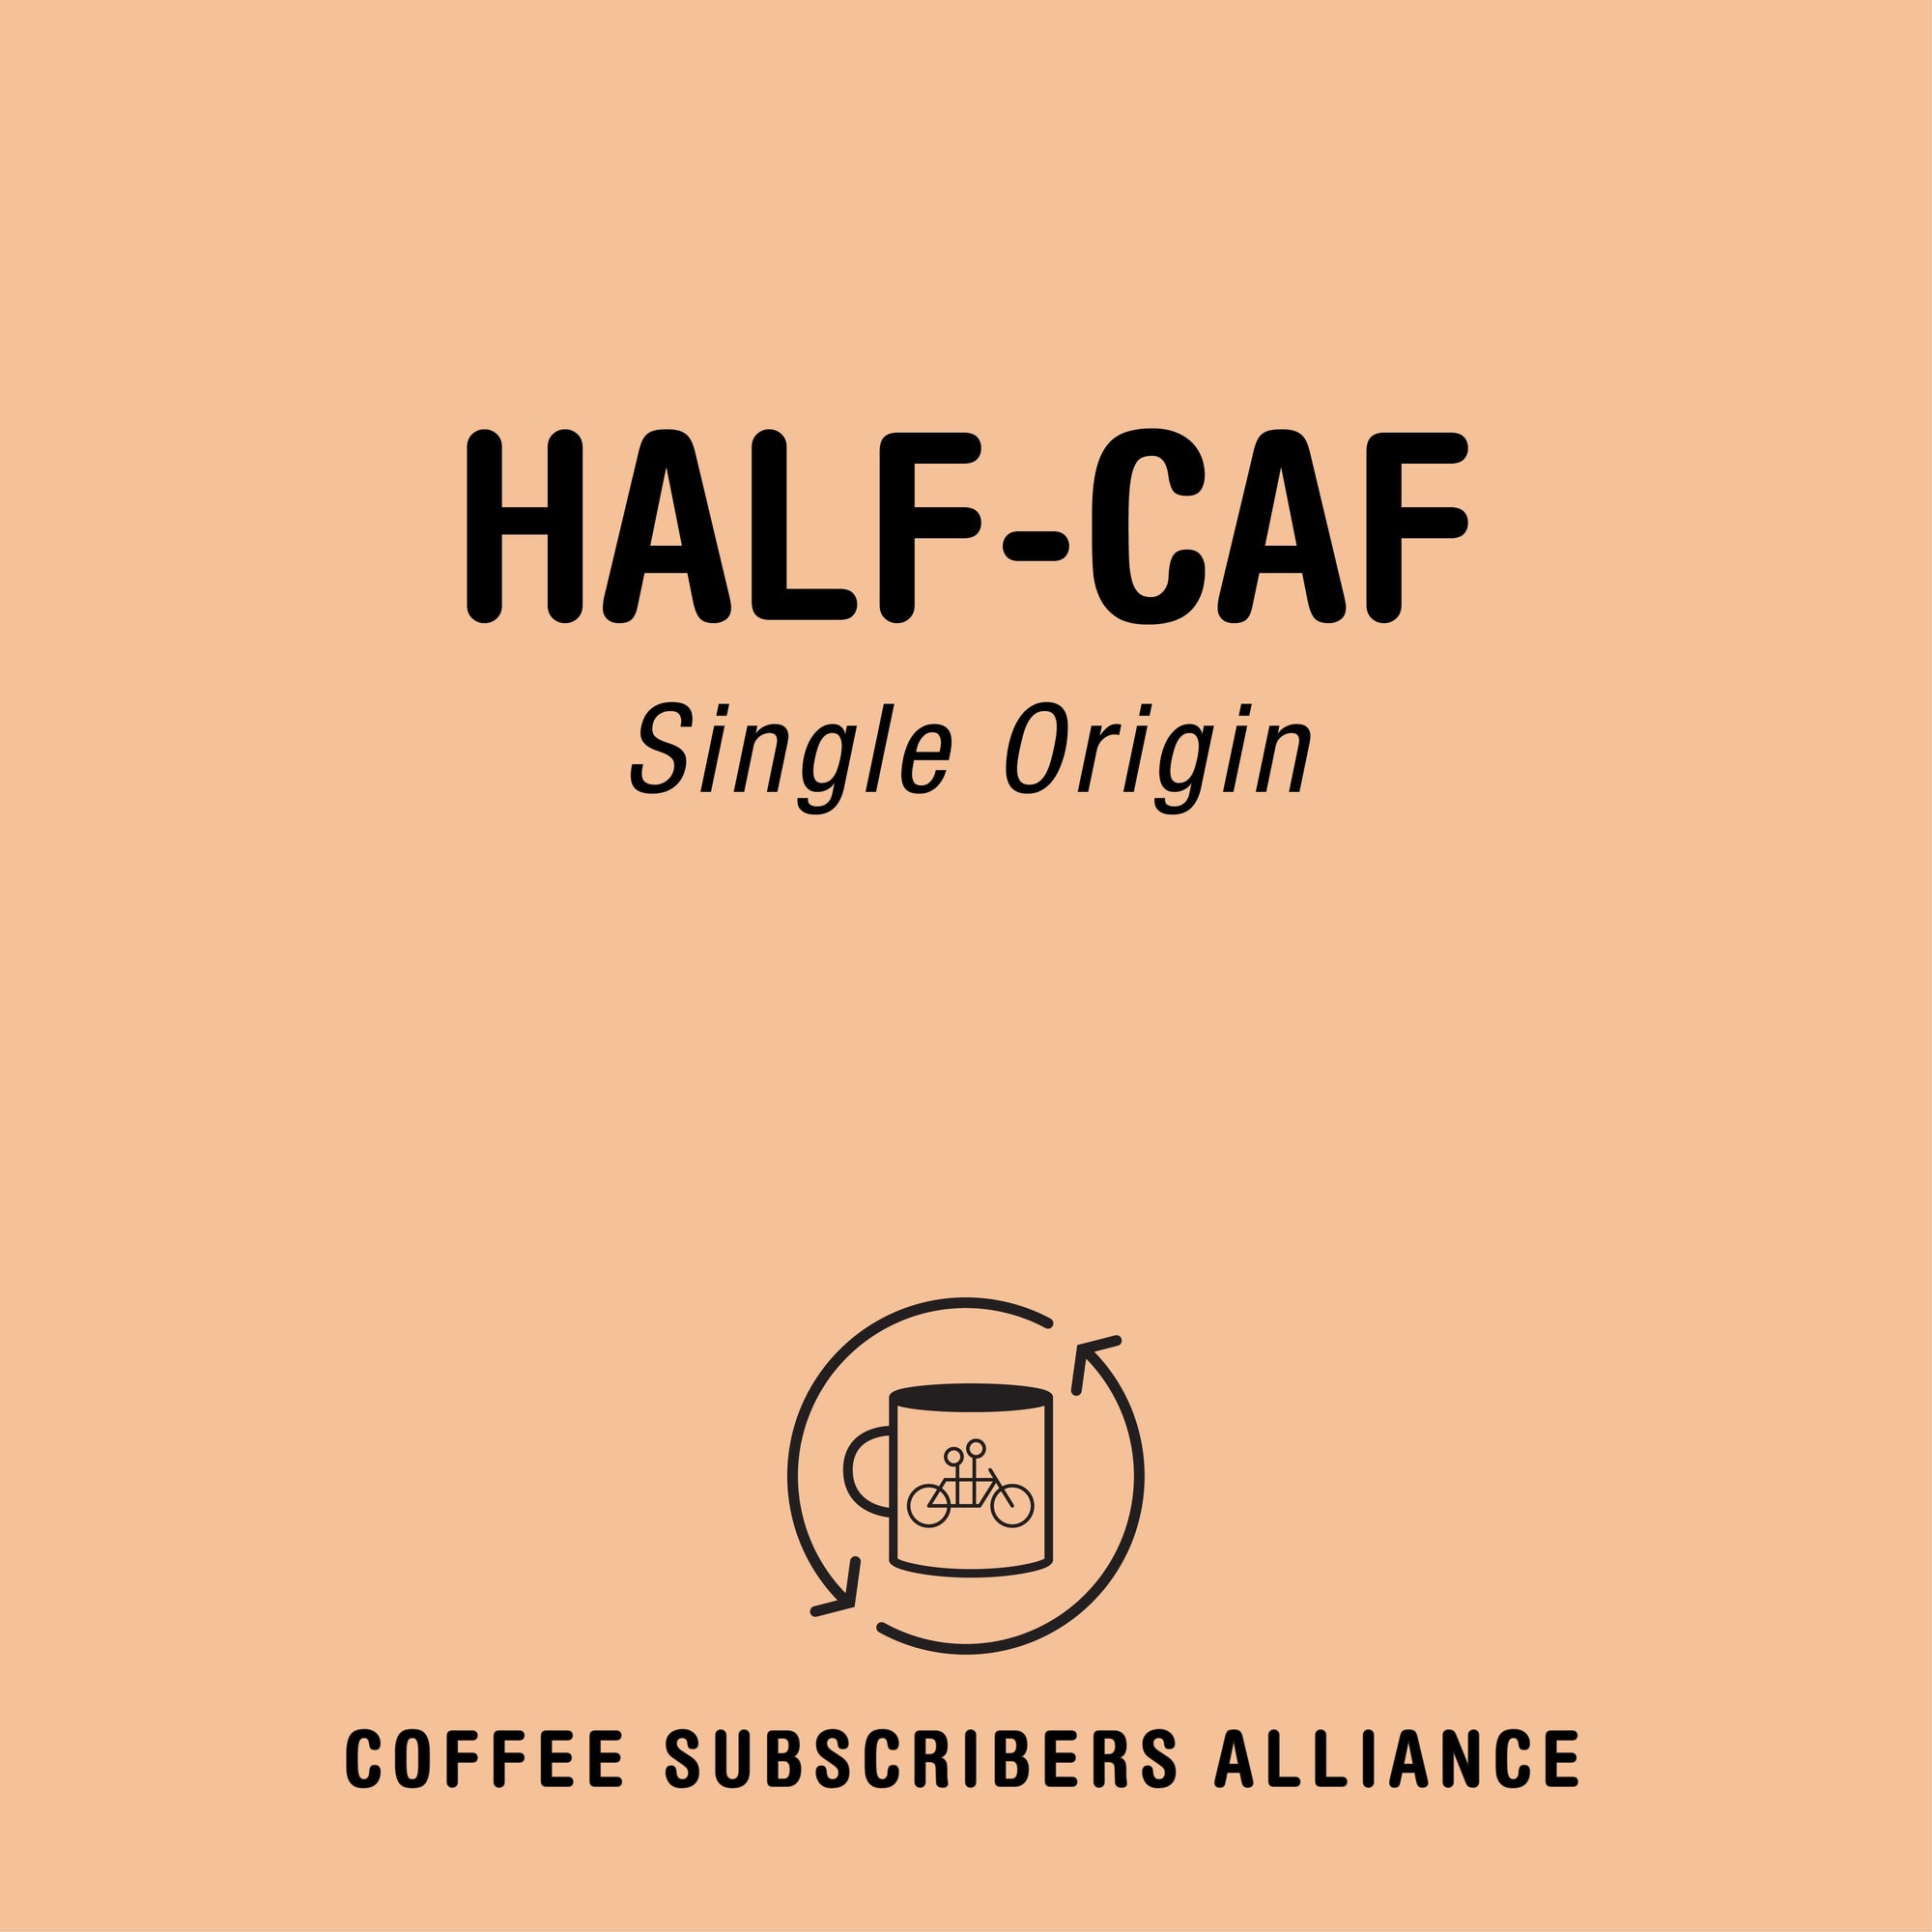 A minimalistic coffee advertisement with the text "Half-Caf Subscription" at the top, and a logo depicting a coffee cup with steam lines enclosed in a circle, labeled "Tandem Coffee Subscribers Alliance.